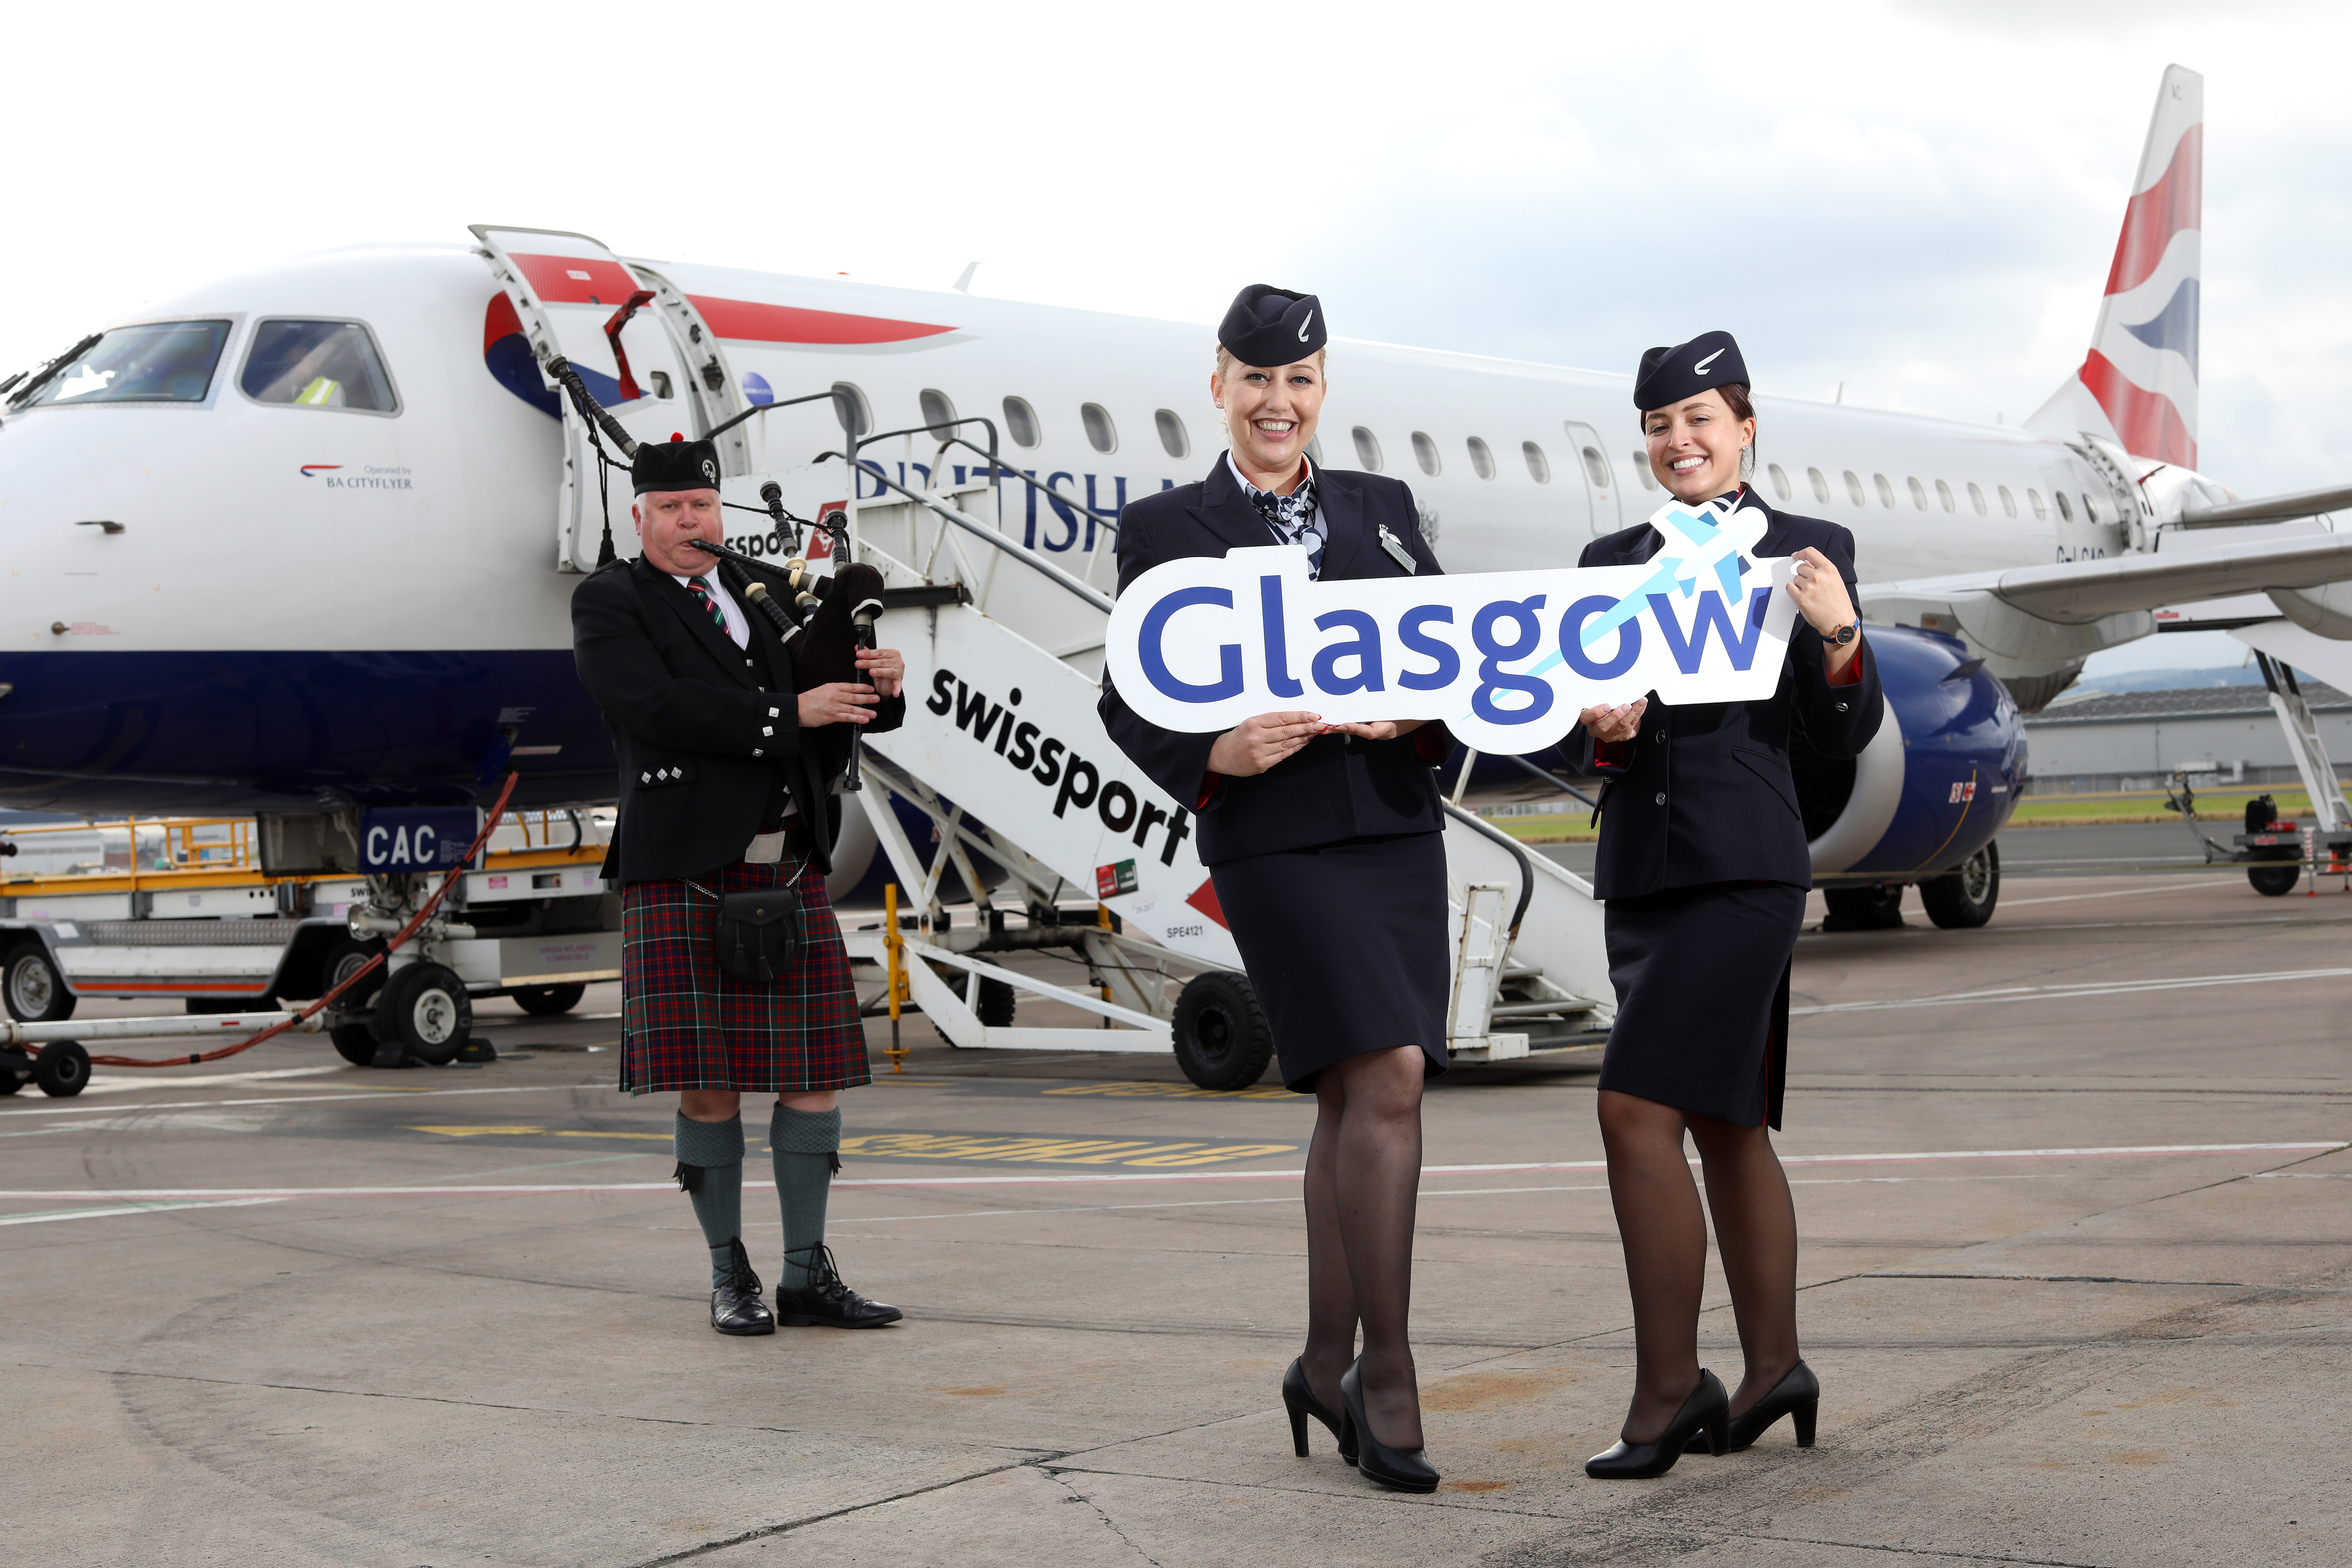 Flights to Glasgow commence from Belfast City Airport